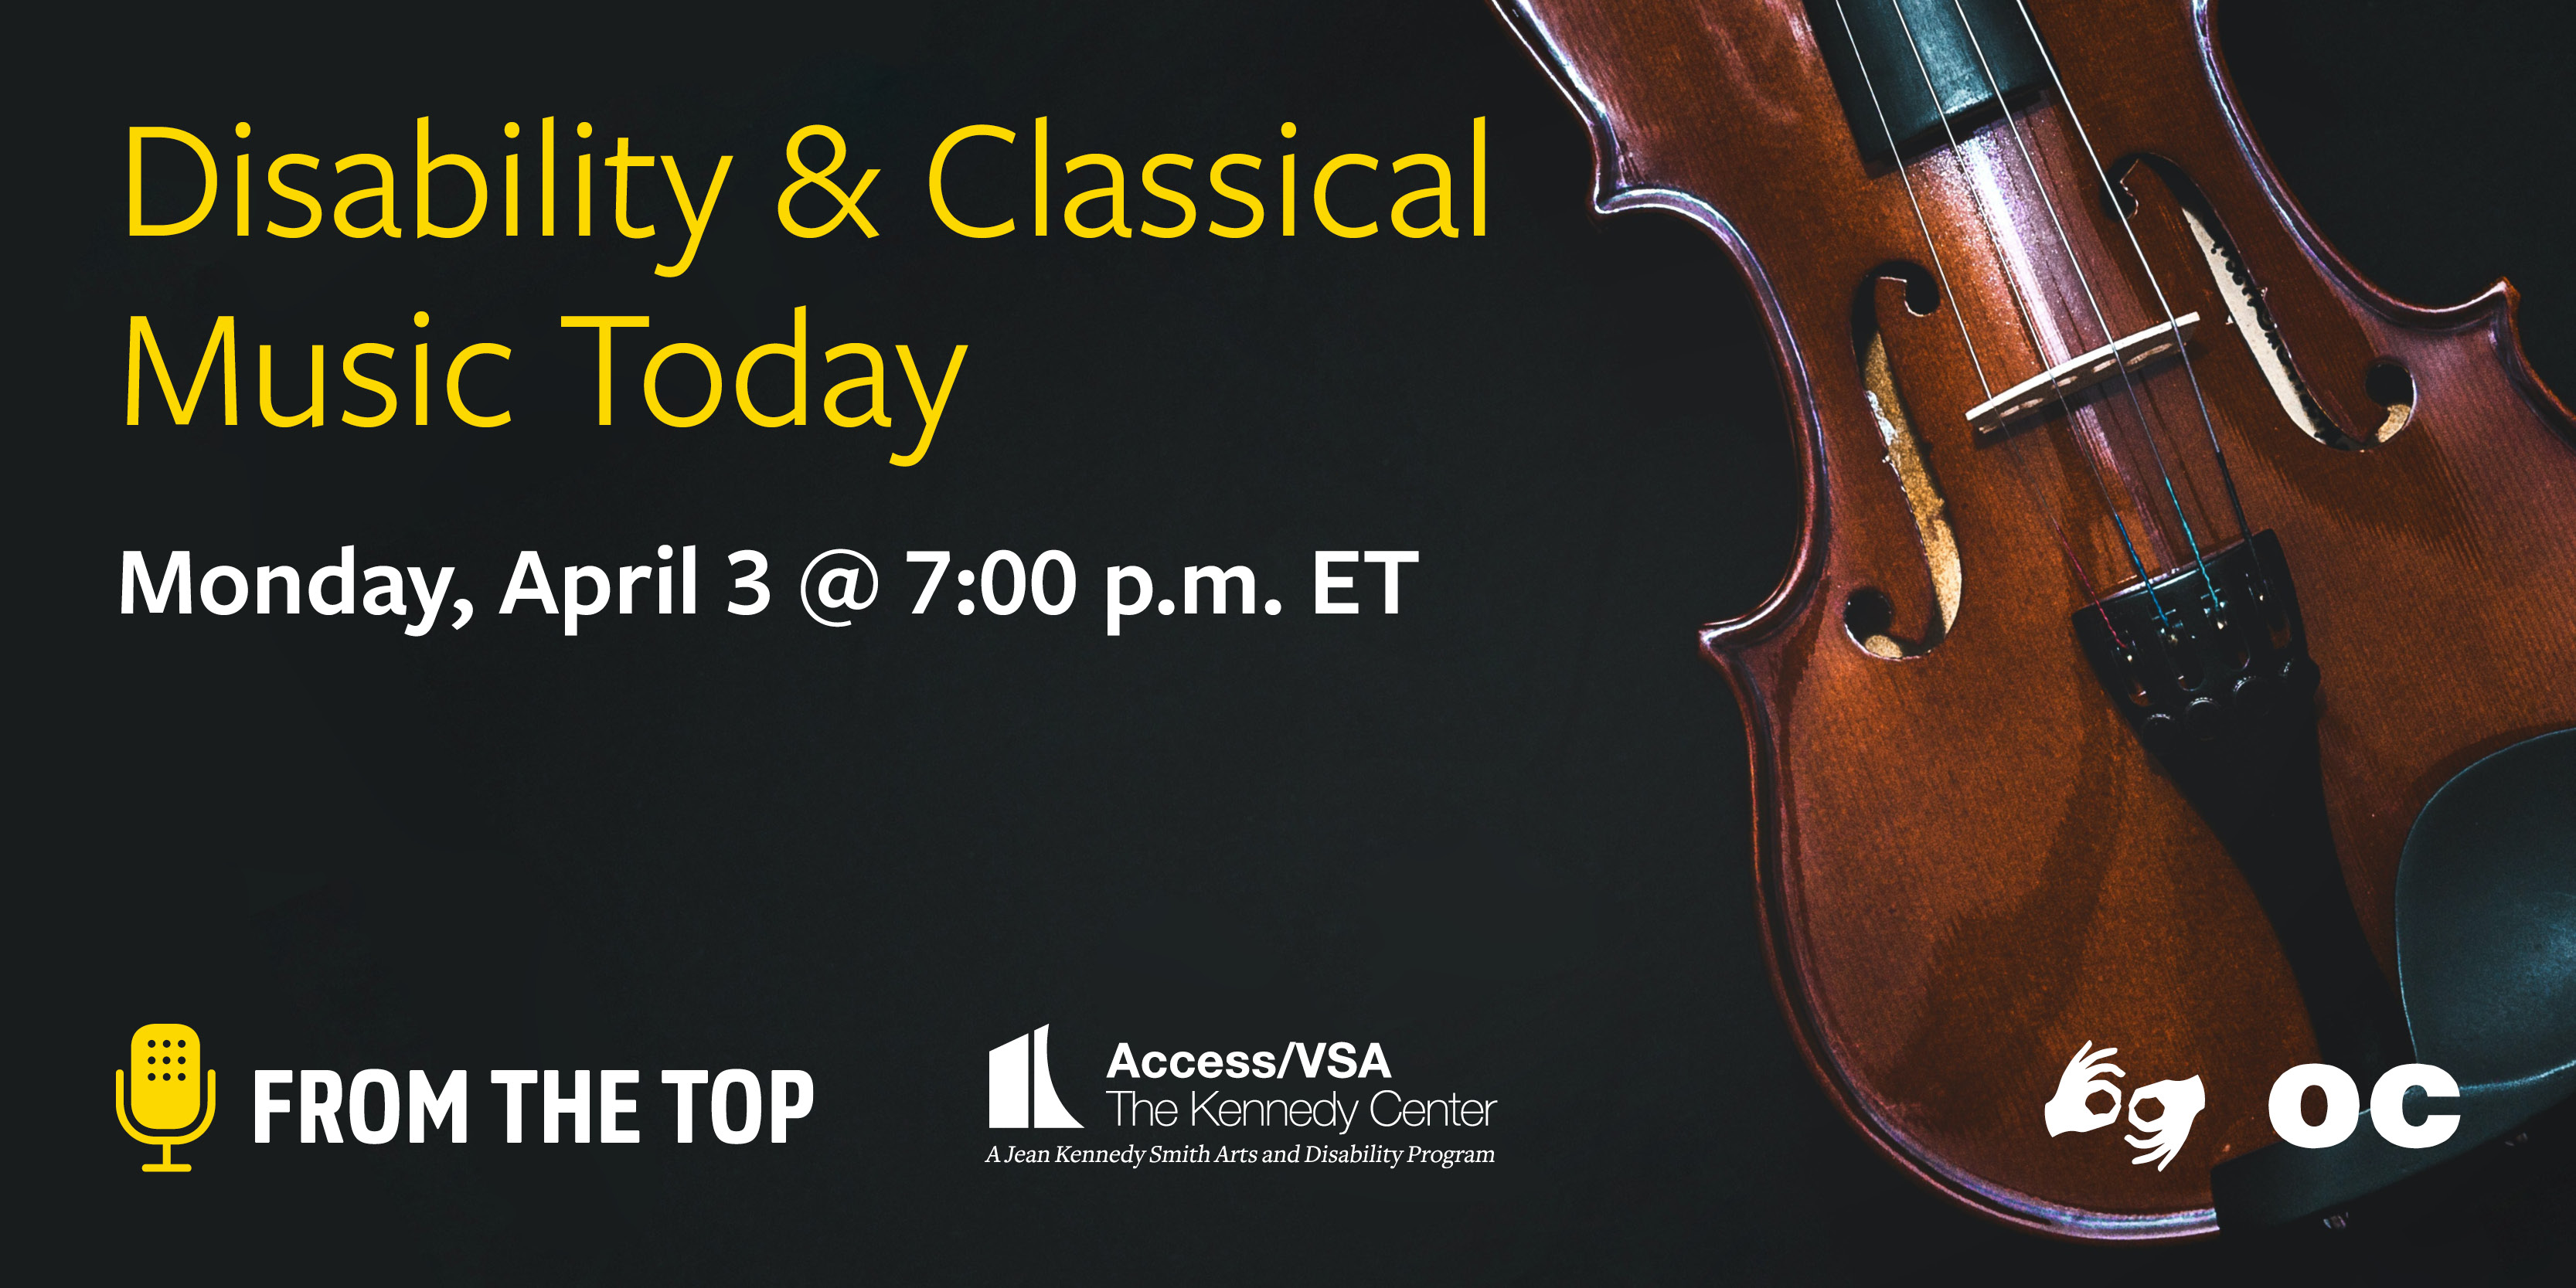 Graphic of a violin, with a black background and text "Disability & Classical Music Today, Monday, April 3 at 7pm ET." Logos of the Kennedy Center Office of Access/VSA and From the Top appear in white and yellow at the bottom.